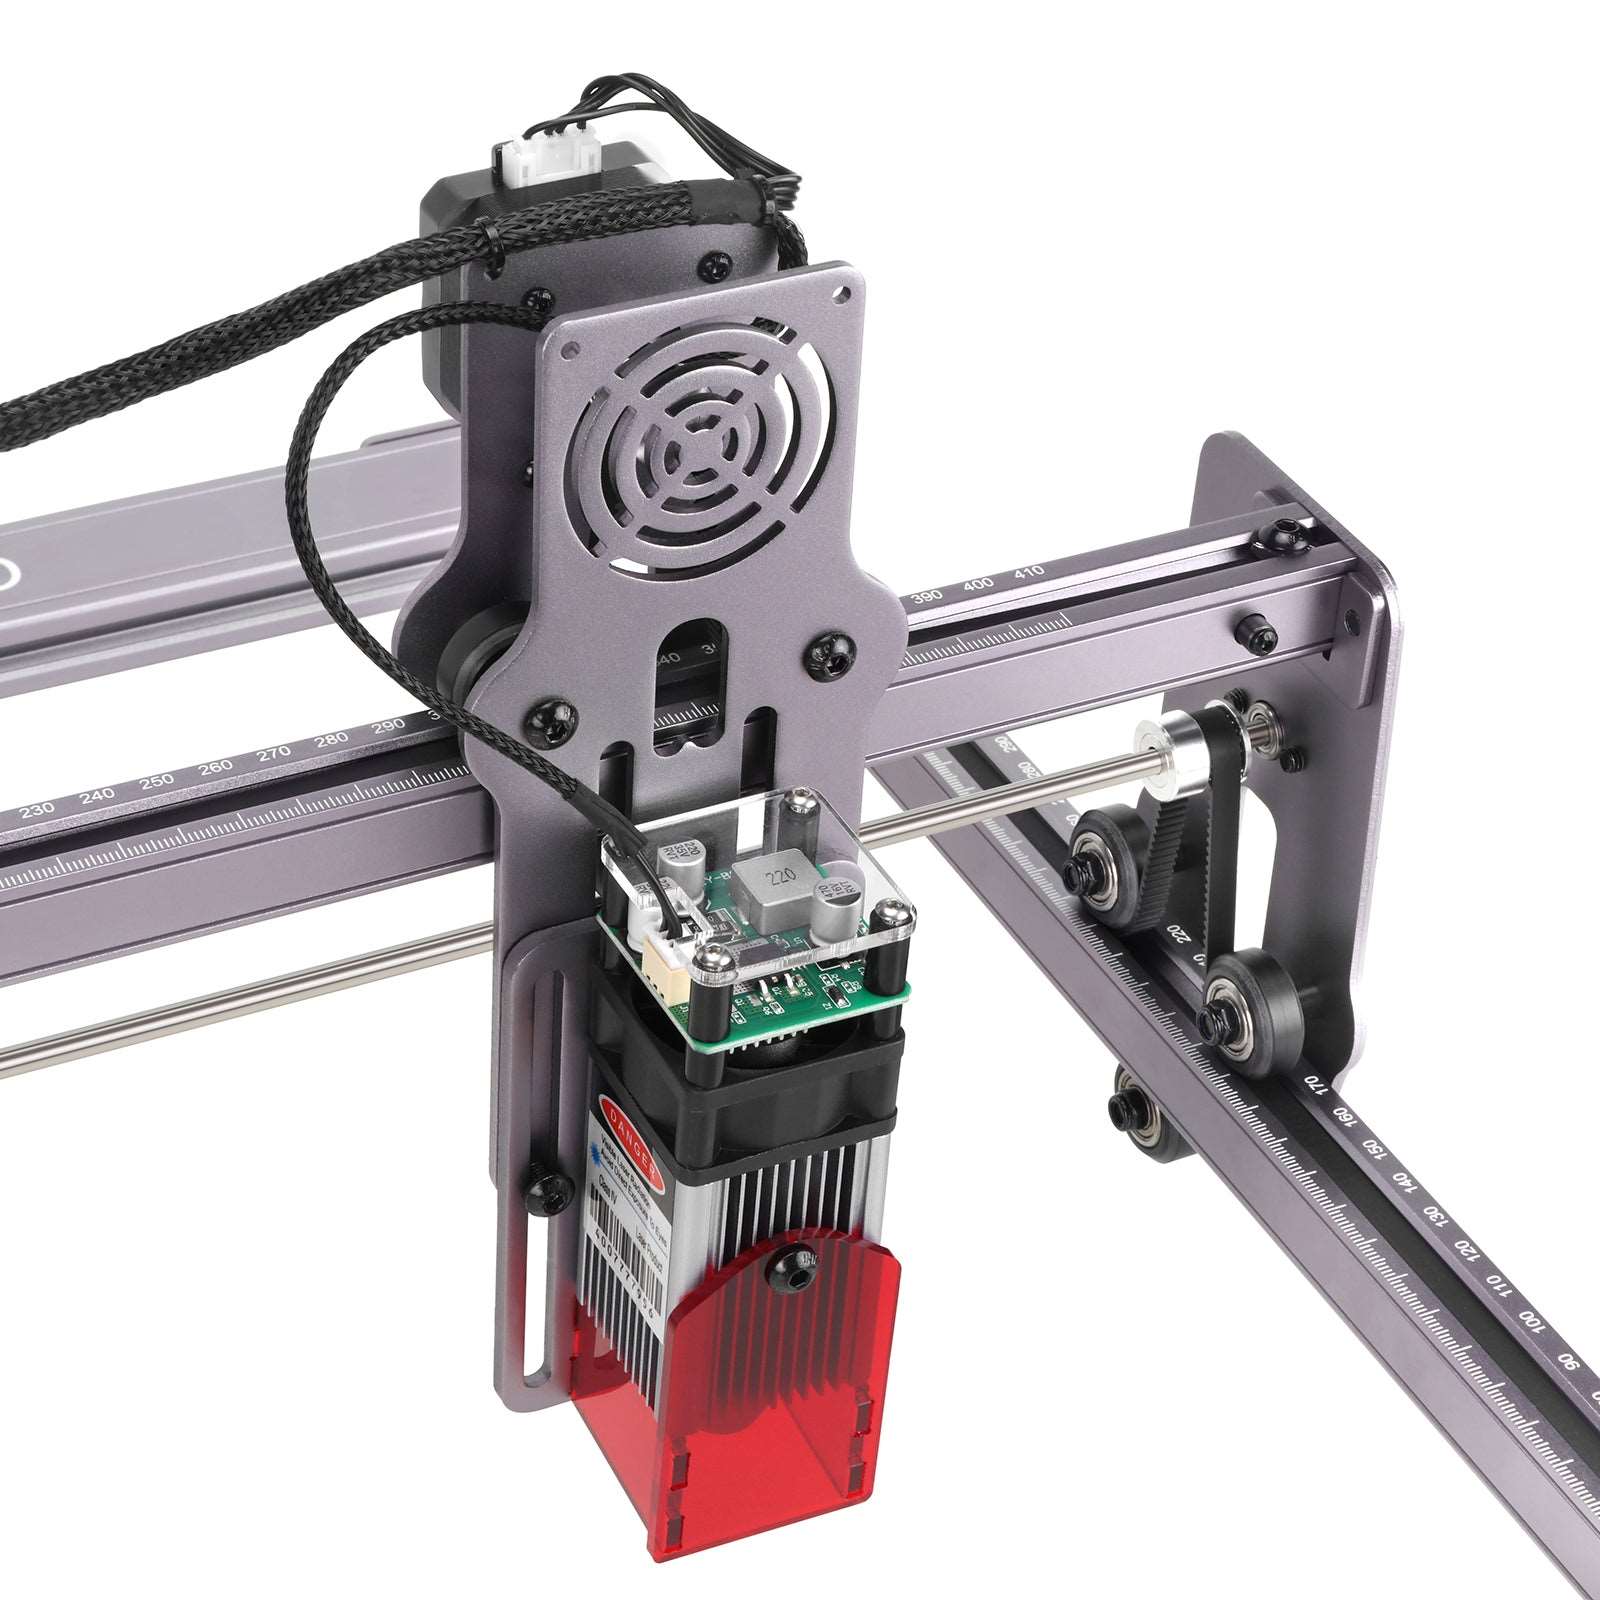 Atomstack A5 pro Laser Engraver - guide, settings, review, upgrade